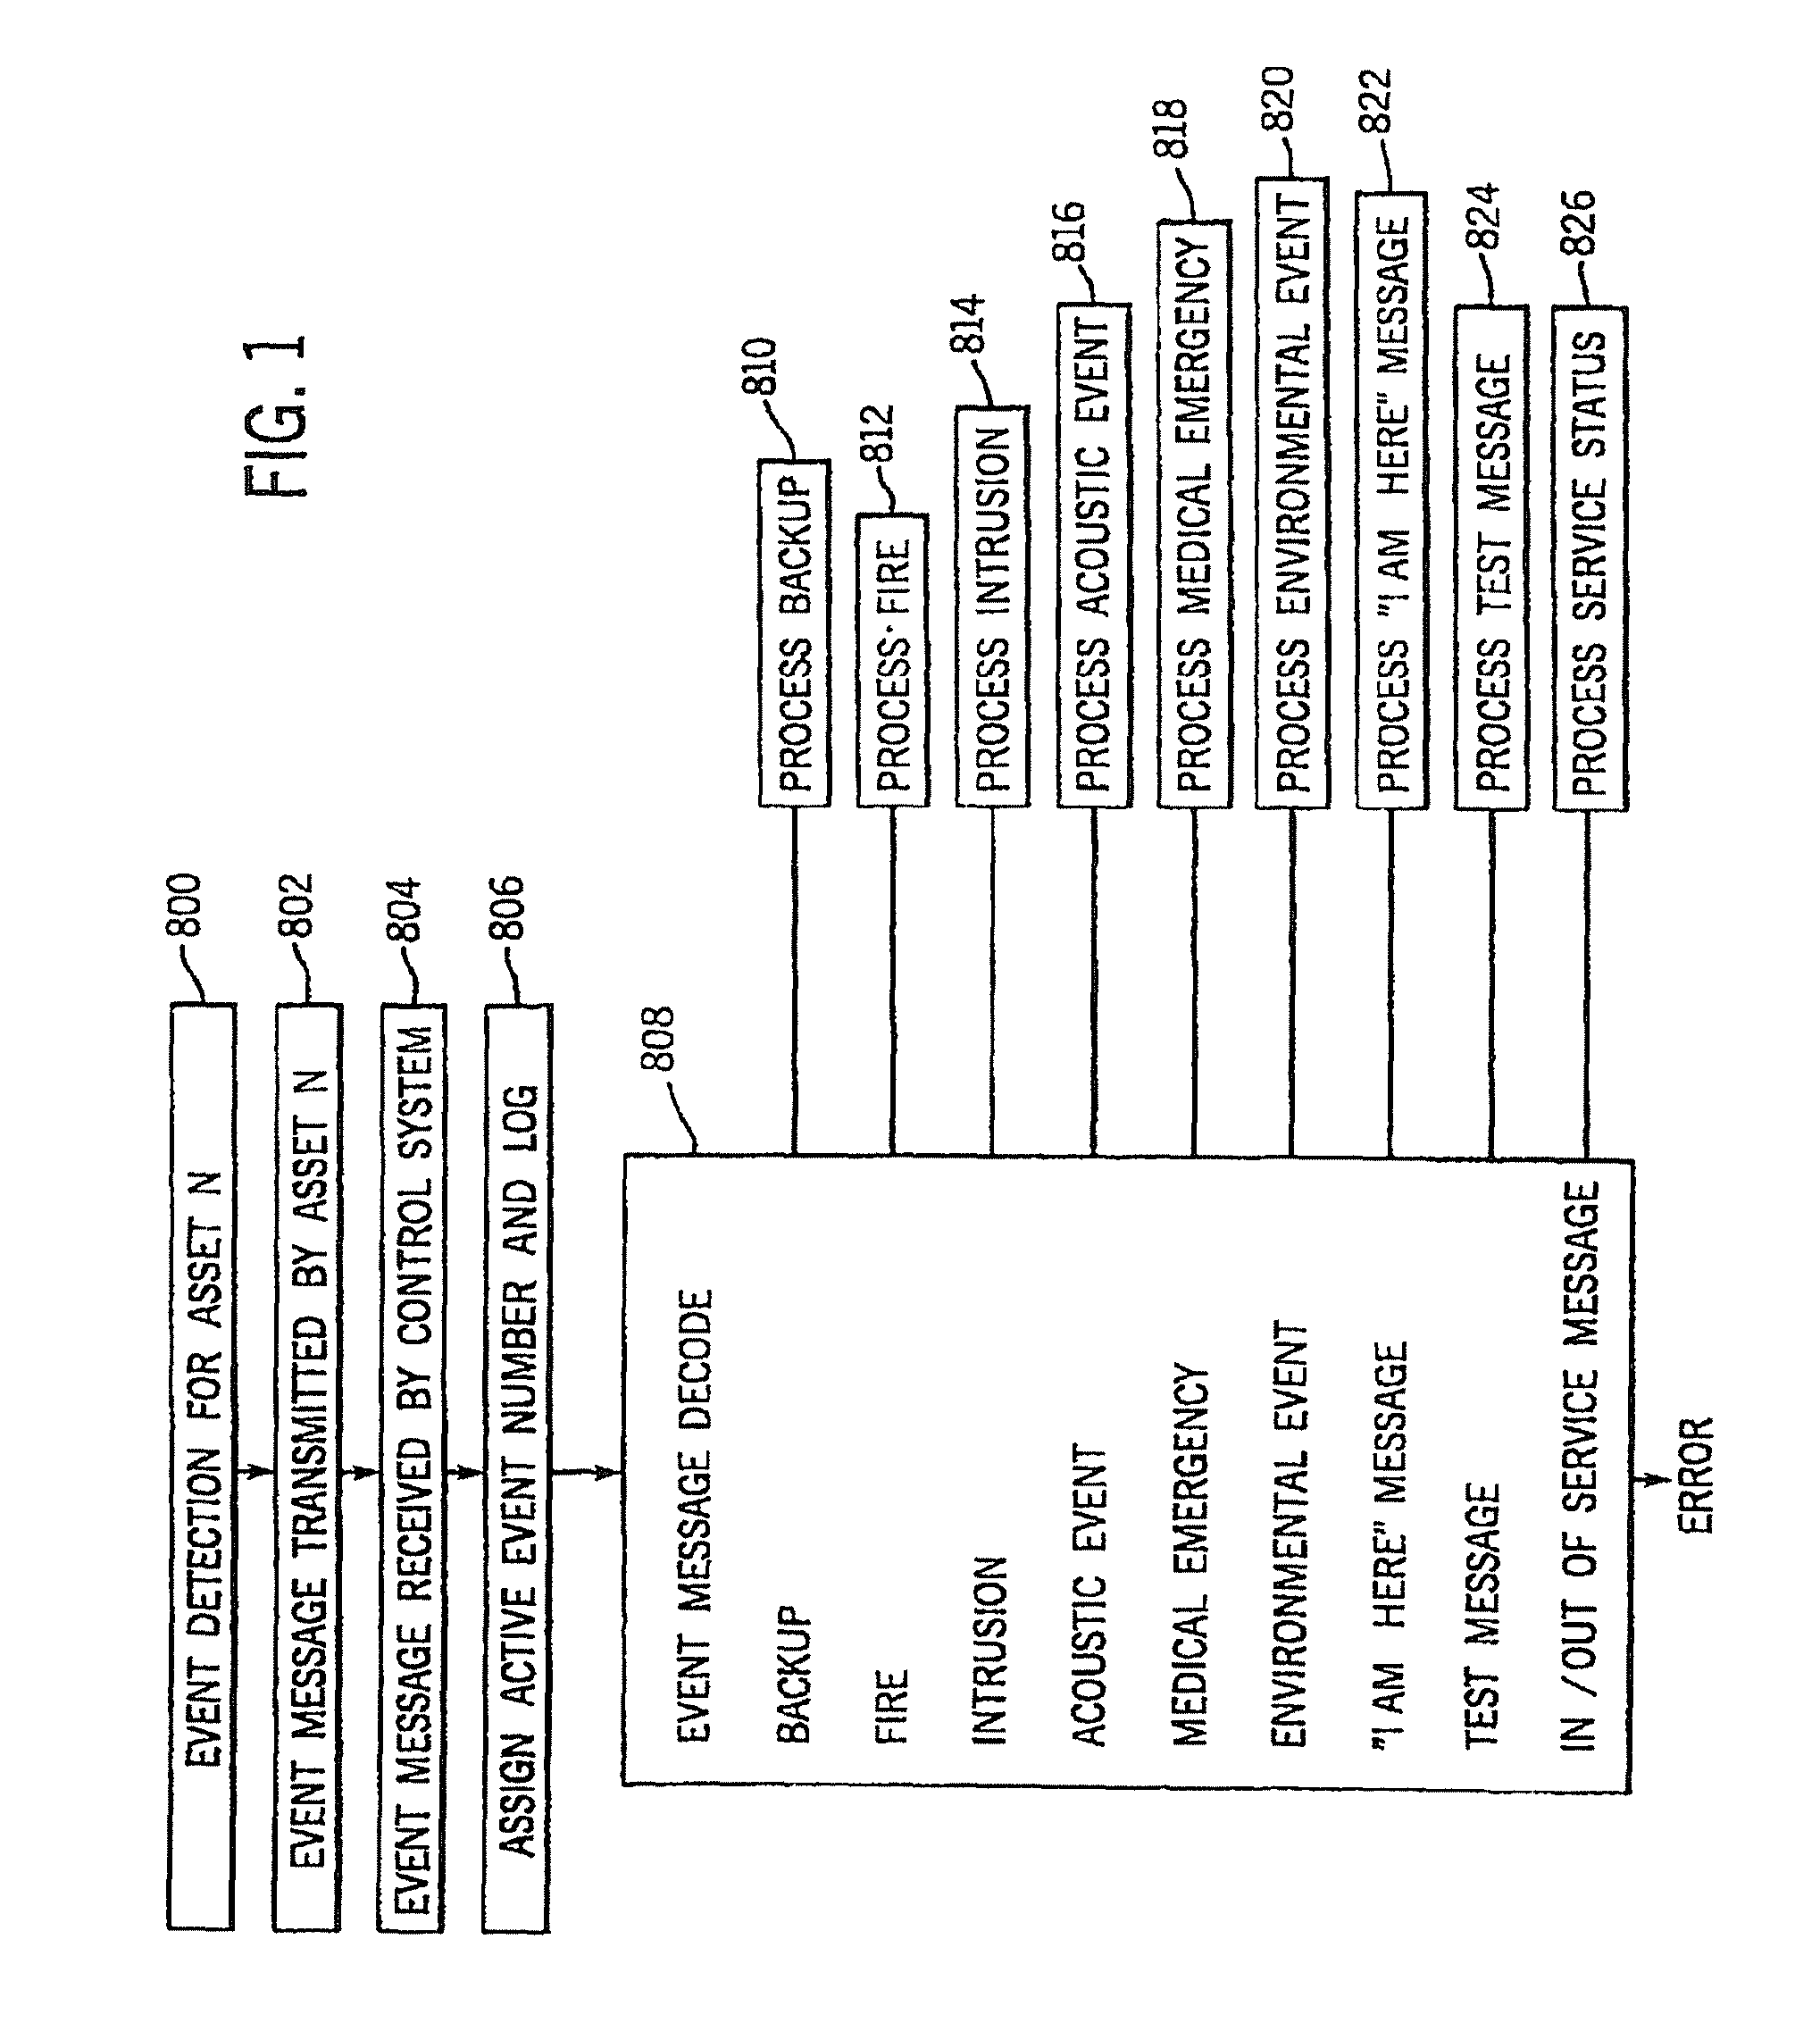 Apparatus for and method of collecting and distributing event data to strategic security personnel and response vehicles